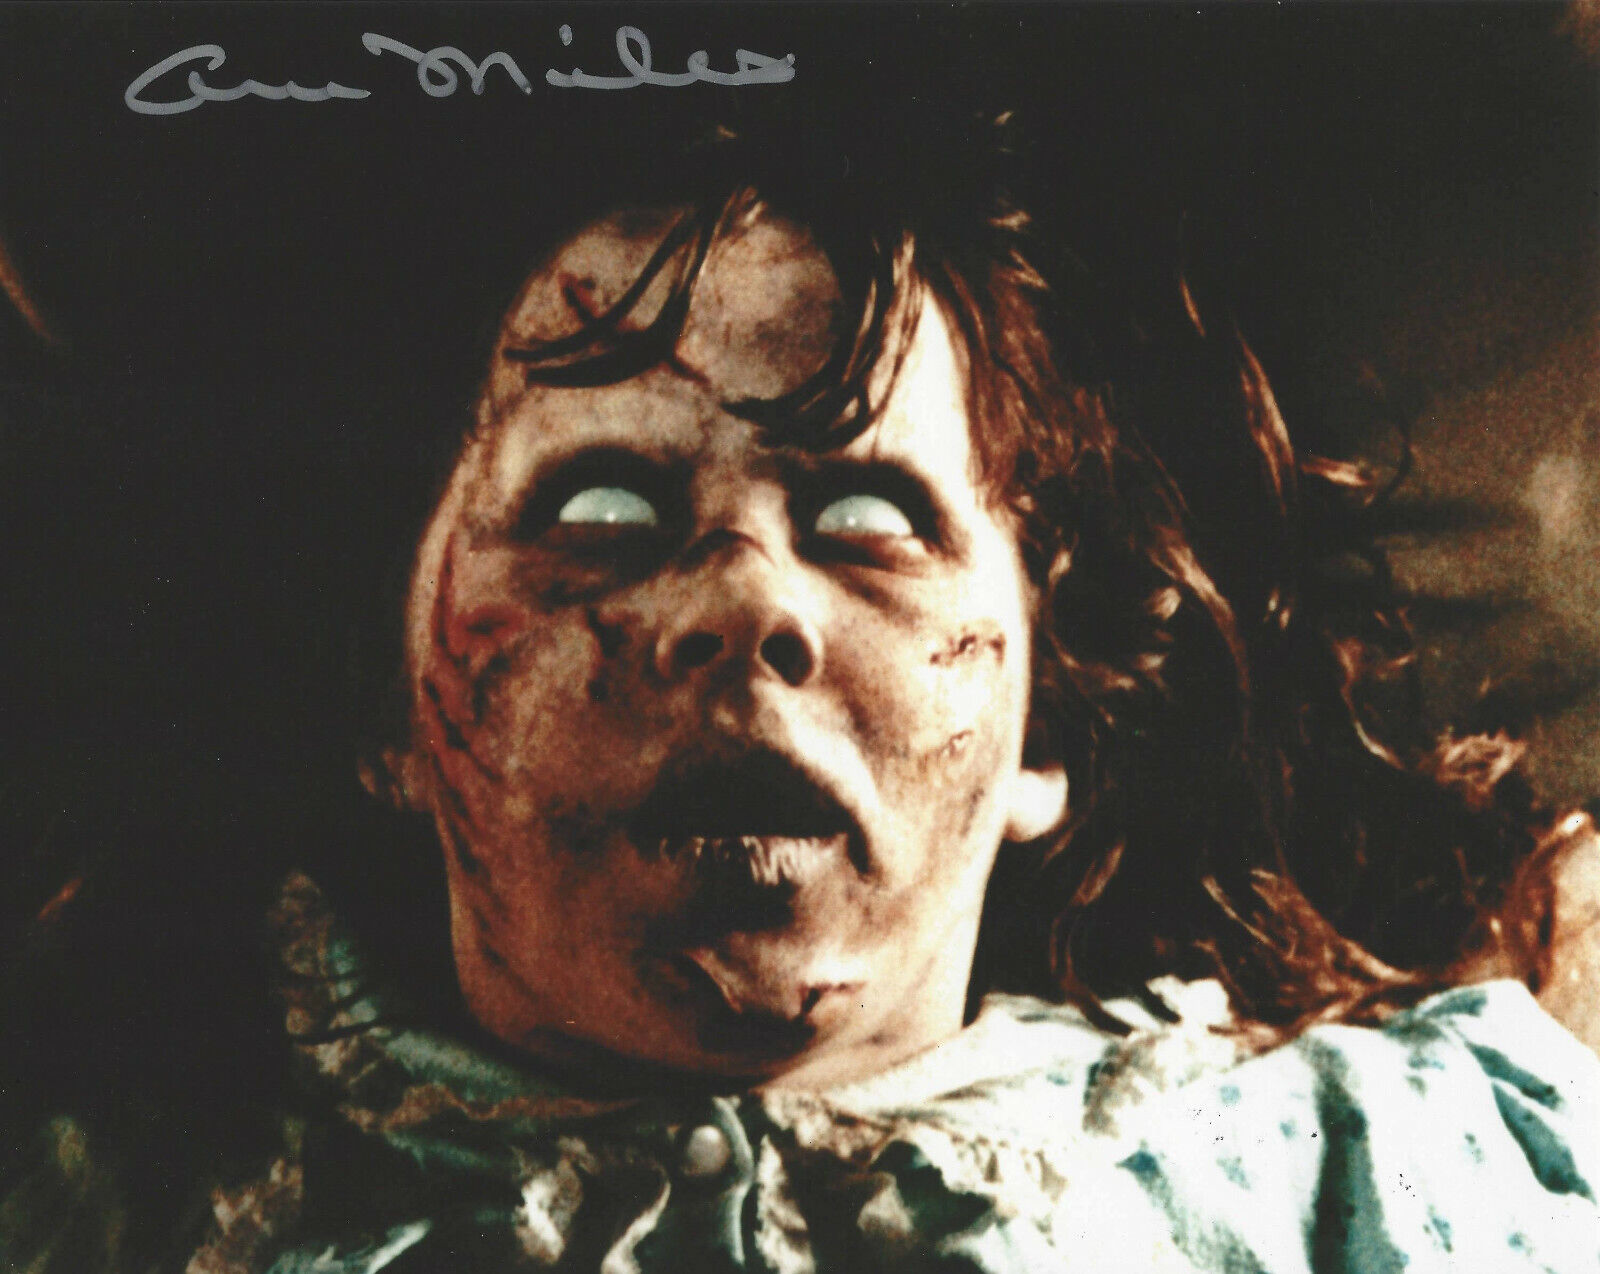 ANN MILES SIGNED AUTHENTIC 'THE EXORCIST' SPIDER WALK REGAN 8x10 Photo Poster painting COA PROOF